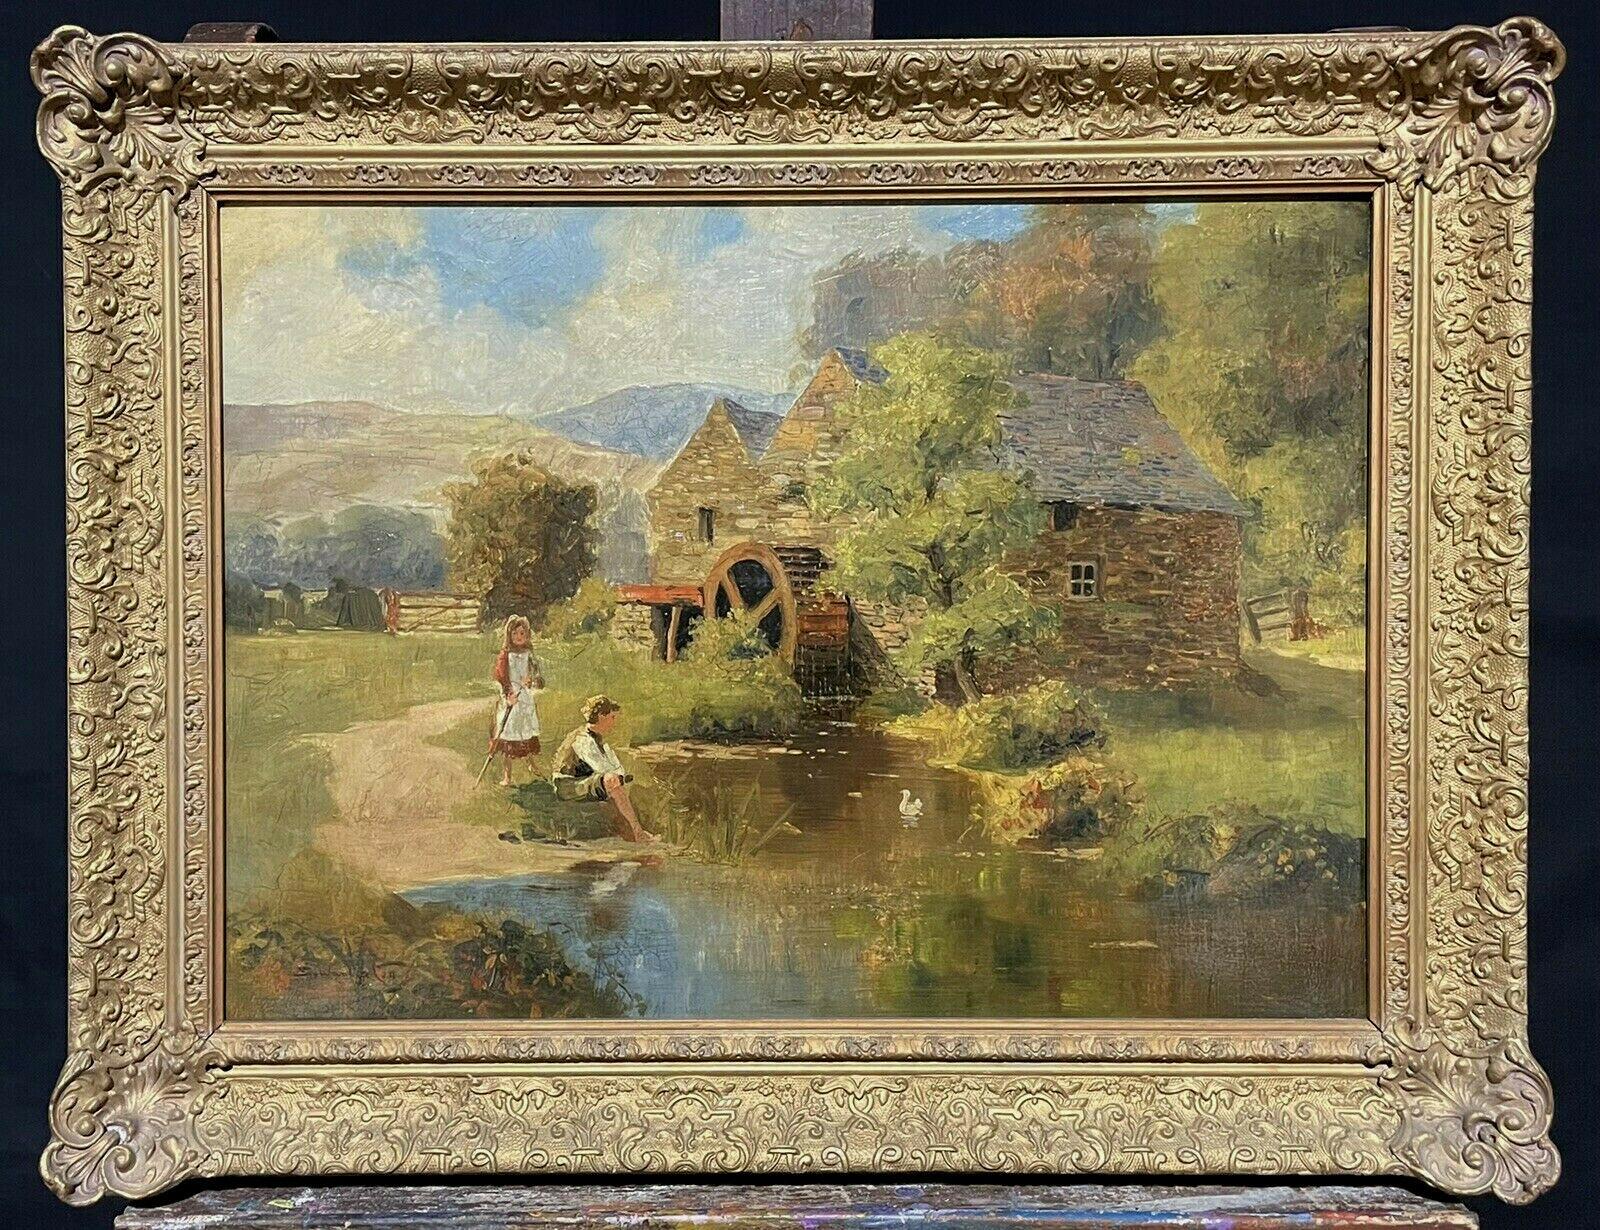 S. Warburton Landscape Painting - SIGNED VICTORIAN ENGLISH OIL PAINTING - CHILDREN PLAYING WATERMILL STREAM DUCKS